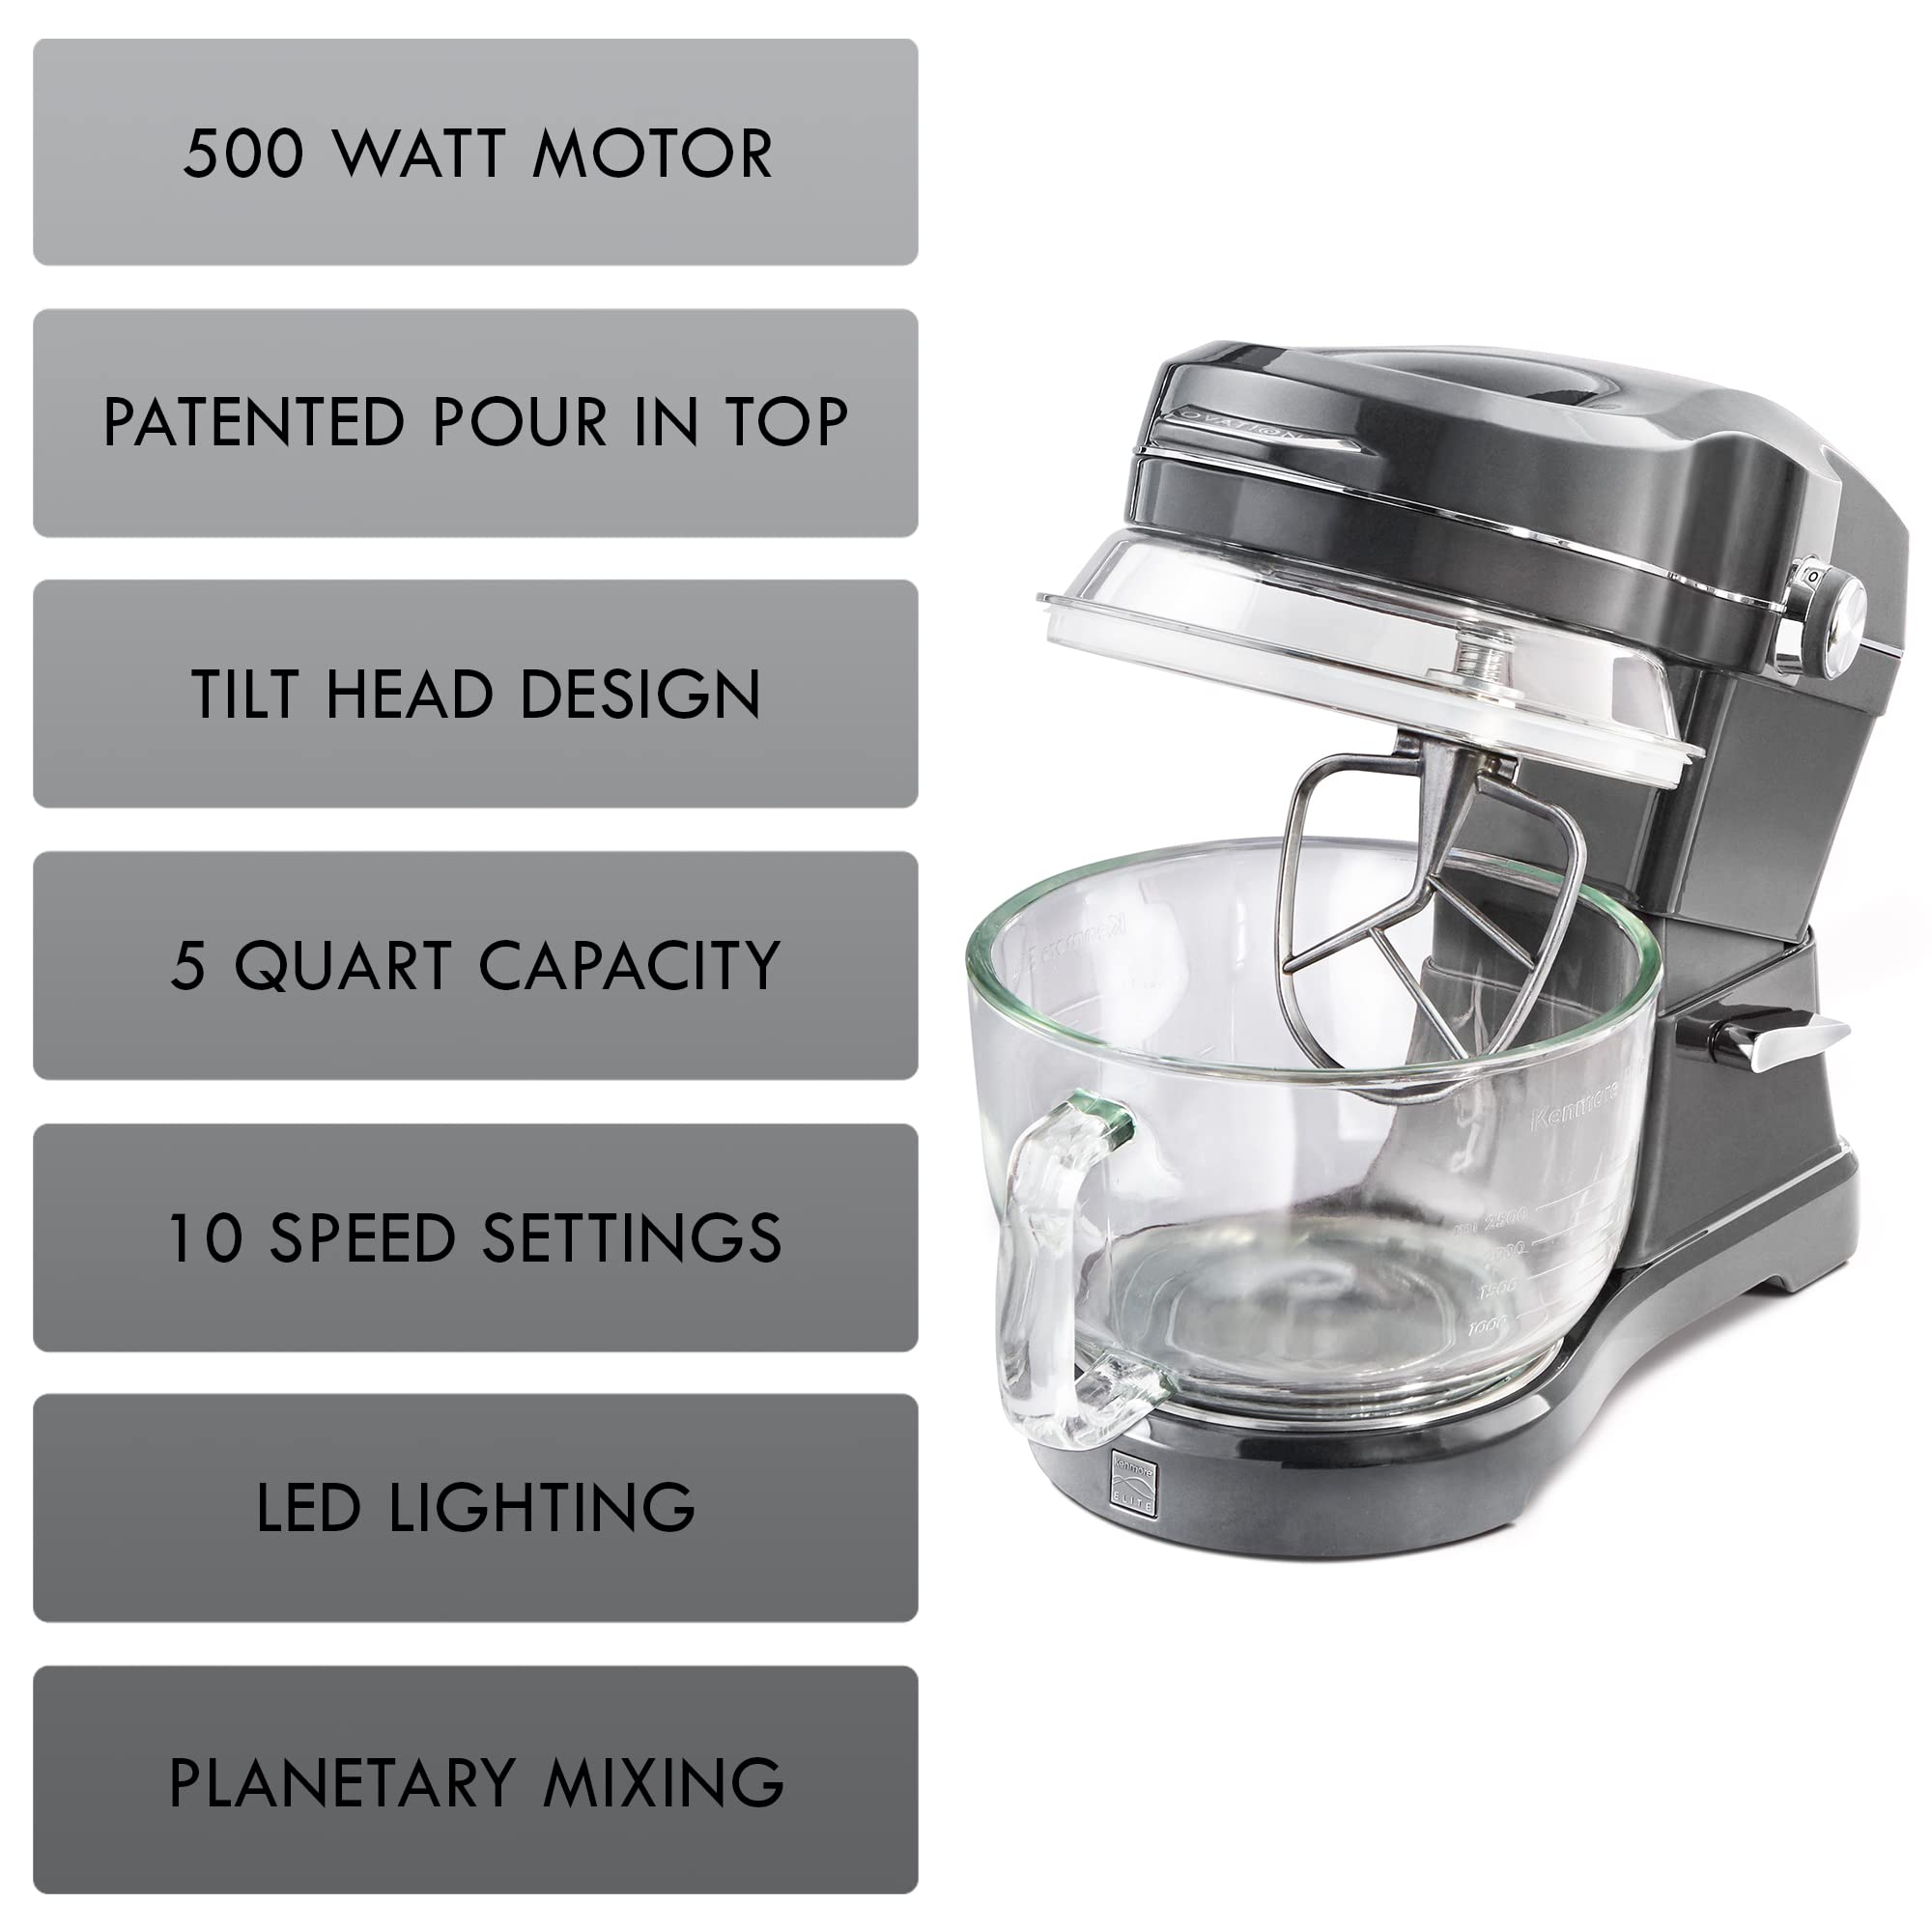 Kenmore Elite Ovation 5 Qt Stand Mixer, 500 Watt 10-Speed Motor, Revolutionary Pour-In Top, Tilt Head, Beater, Whisk, Dough Hook, Planetary Mixing, 360-Degree Splash Guard, Glass Bowl with Lid, Grey